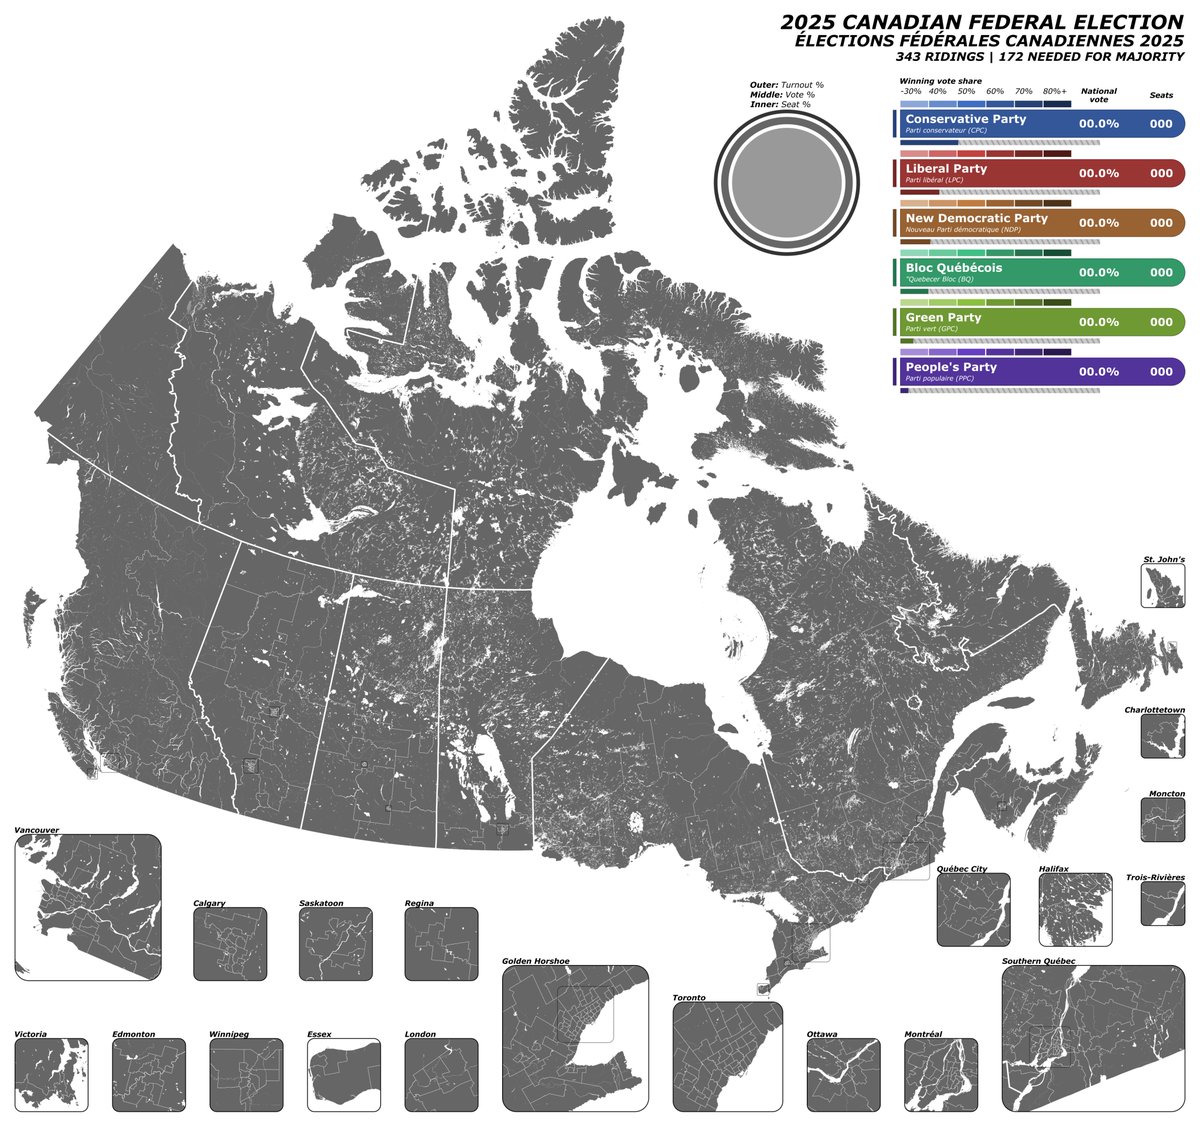 Finished my new Canadian federal electoral map + inserts, pretty happy with how it turned out